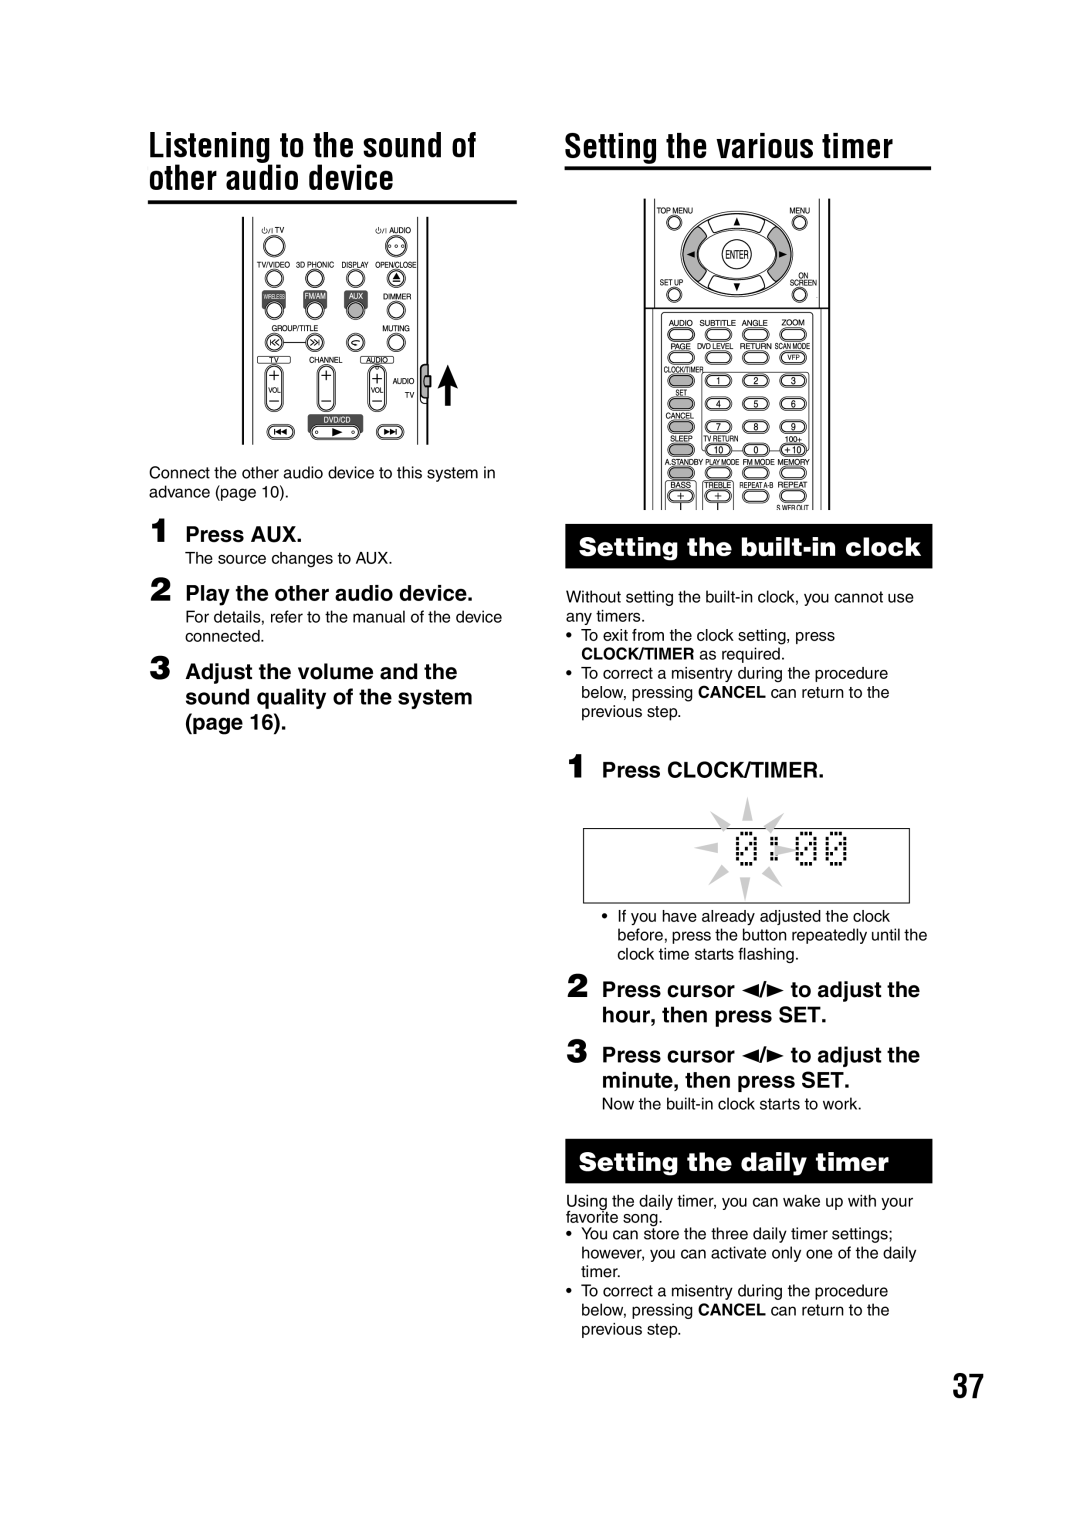 JVC GVT0144-005A manual Setting the various timer, Listening to the sound of other audio device, Setting the built-inclock 